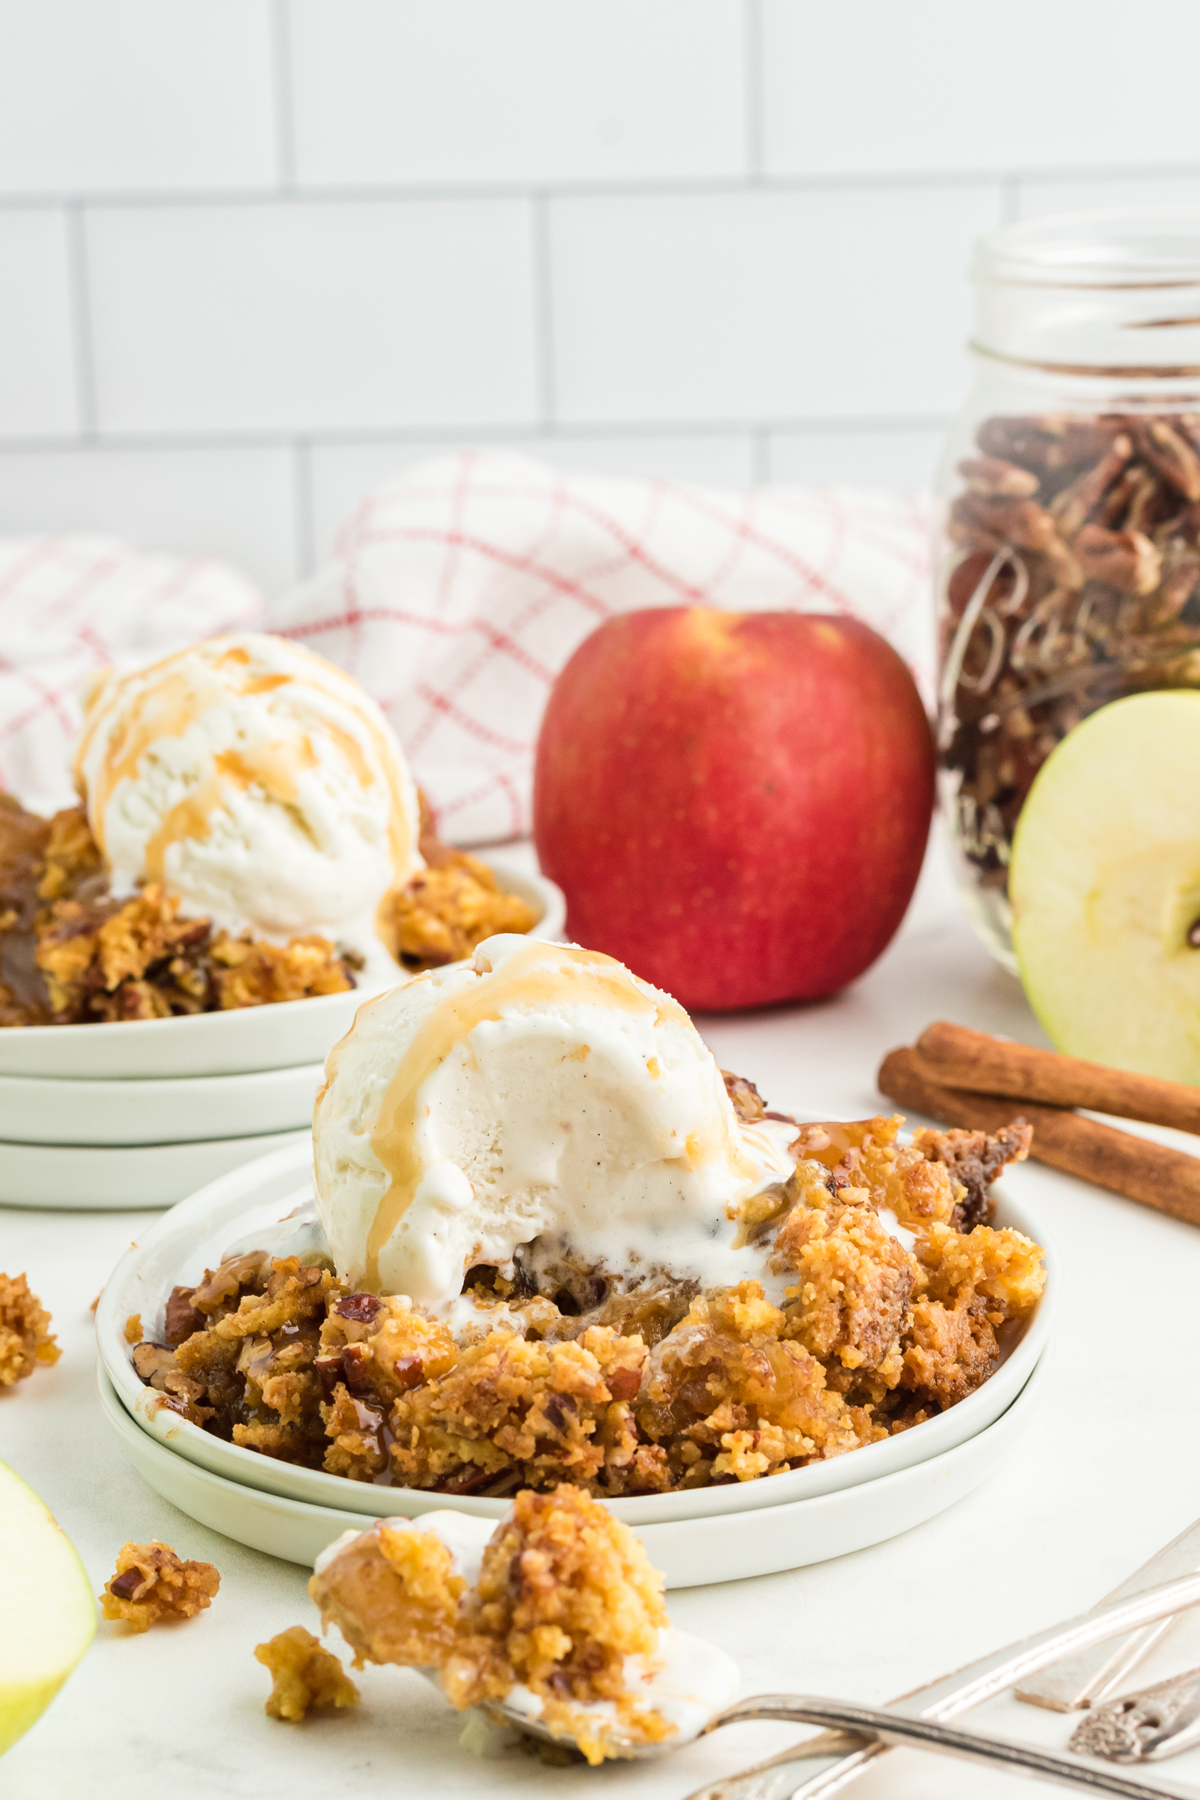 An upclose photo of Apple Dump Cake on a white plate with ingredients on background